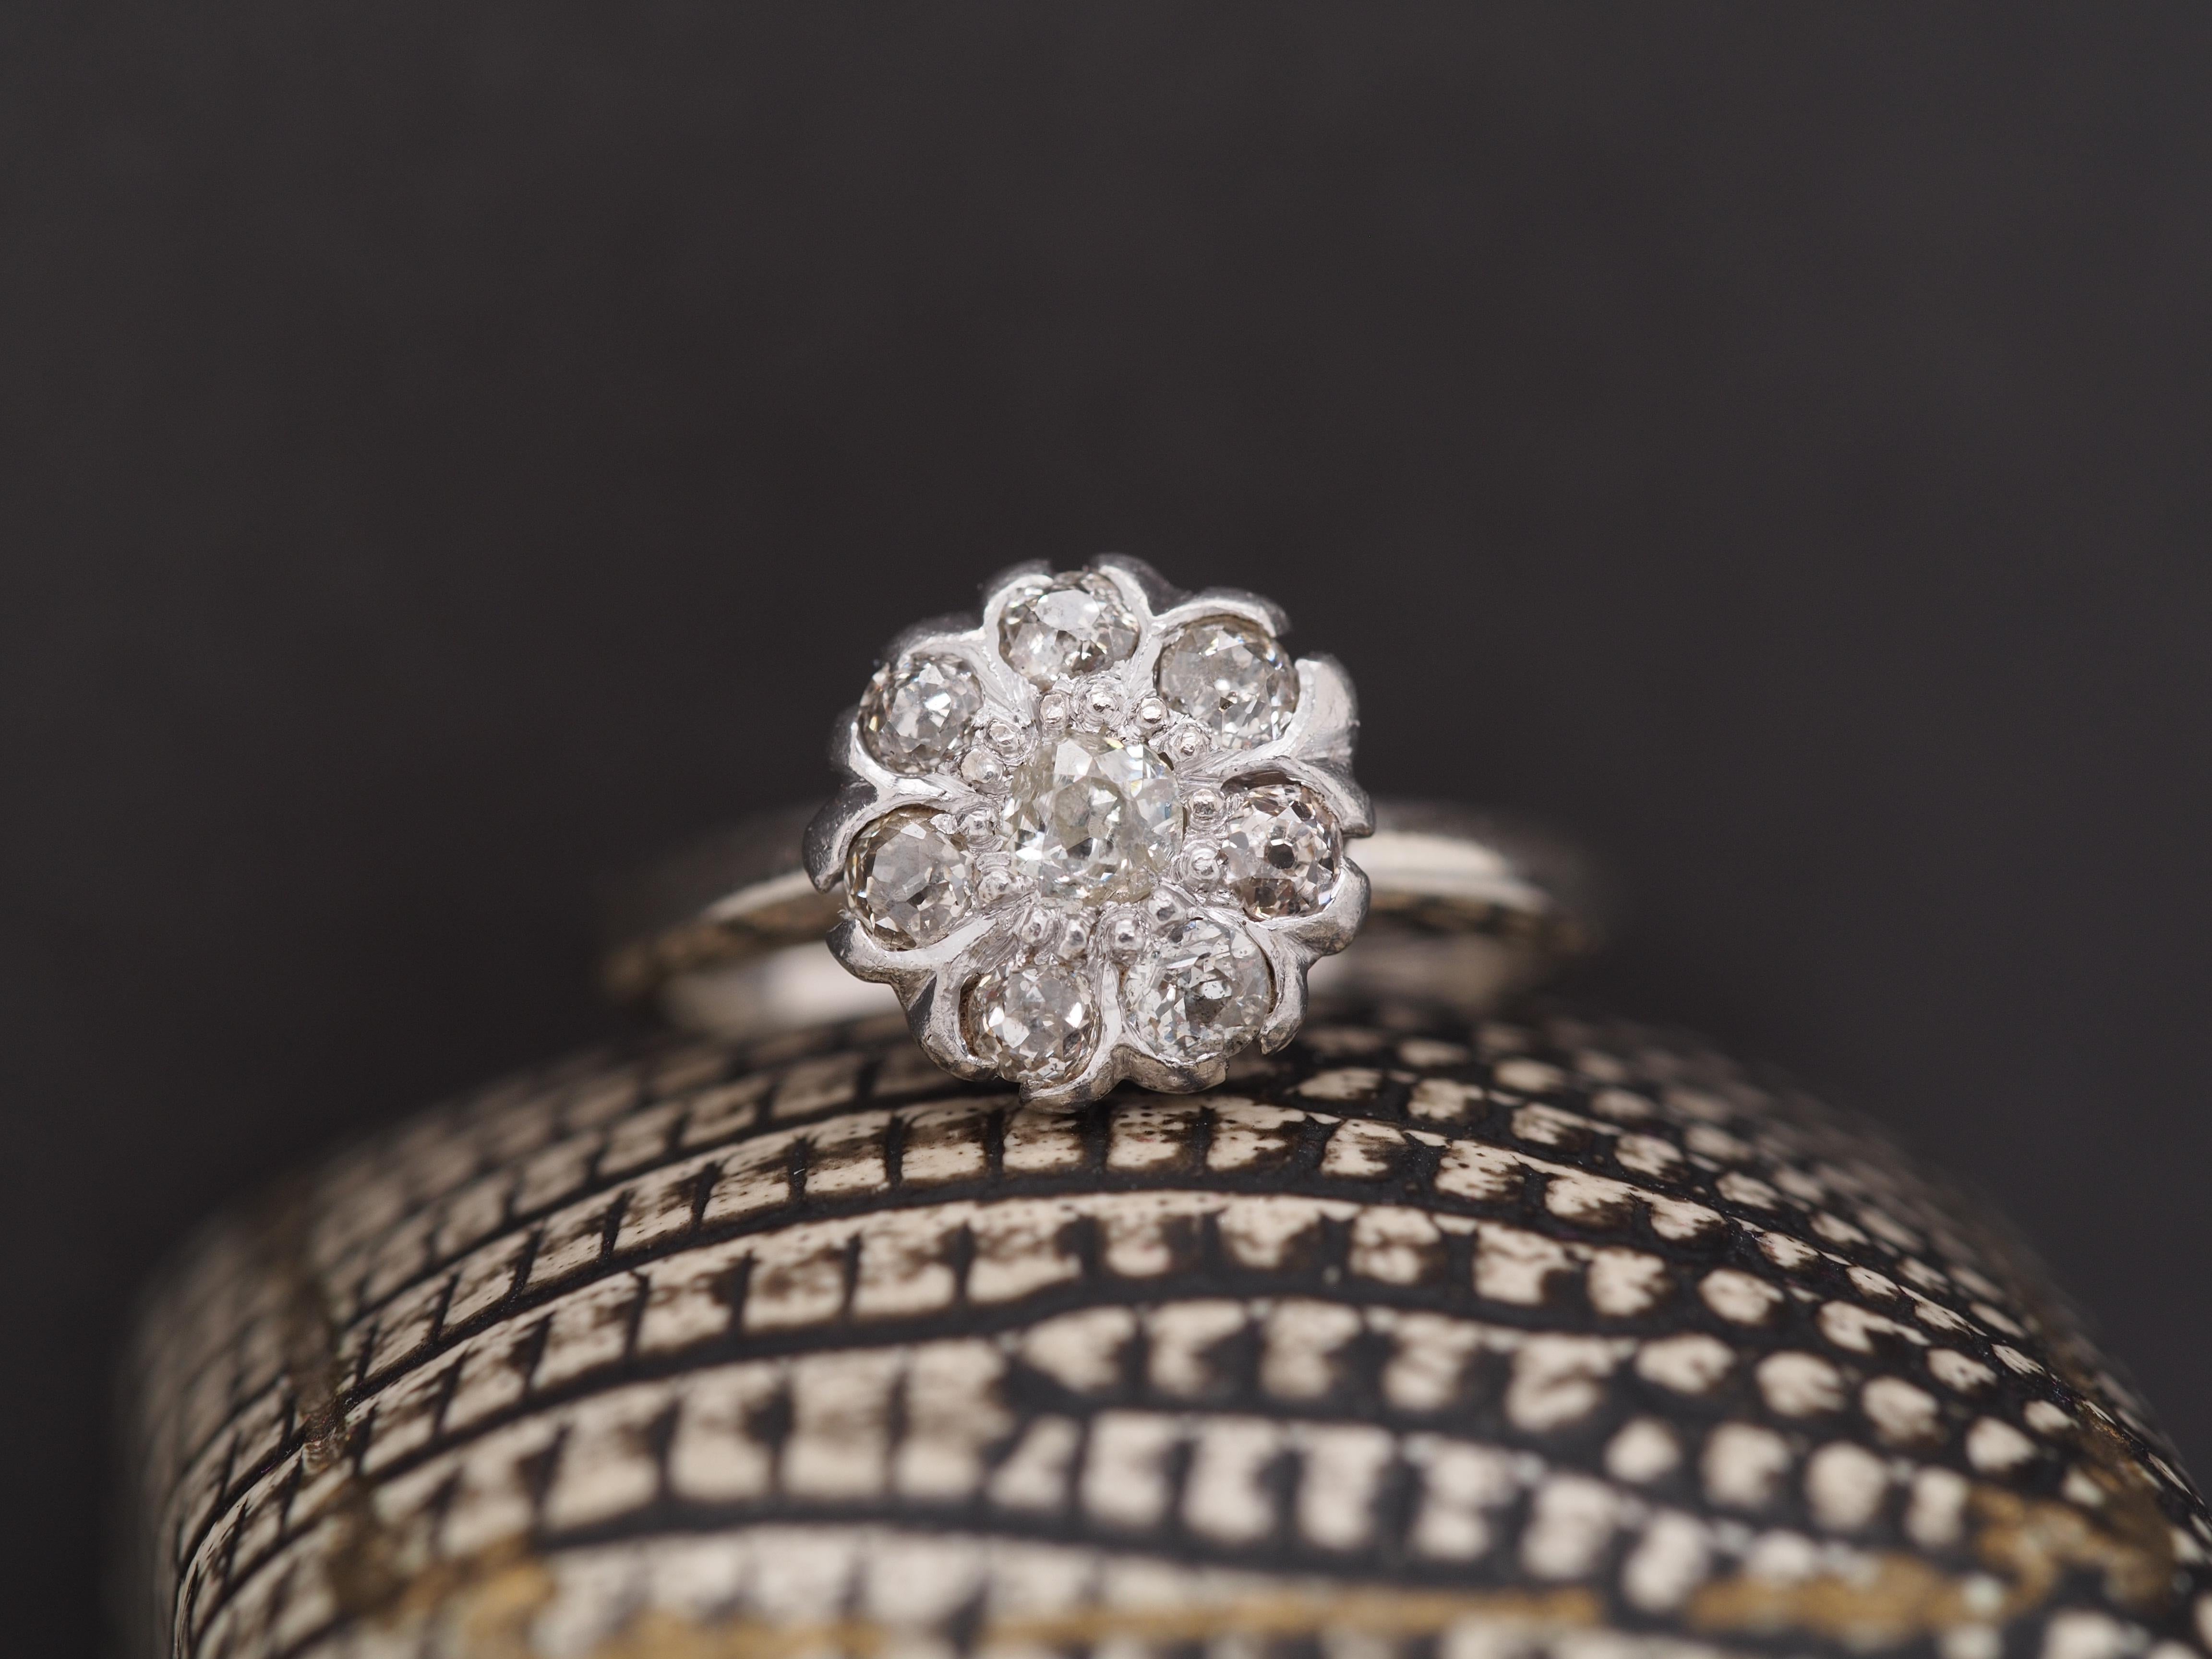 Year: 1910
Item Details:
Ring Size: 5.5
Metal Type: 14K White Gold [Hallmarked, and Tested]
Weight: 3.7 grams
Diamond Details:
Weight: .50cttw
Cut: Old Mine Brilliant
Color: J
Clarity: I1
Band Width: 1.5 mm
Condition: Excellent